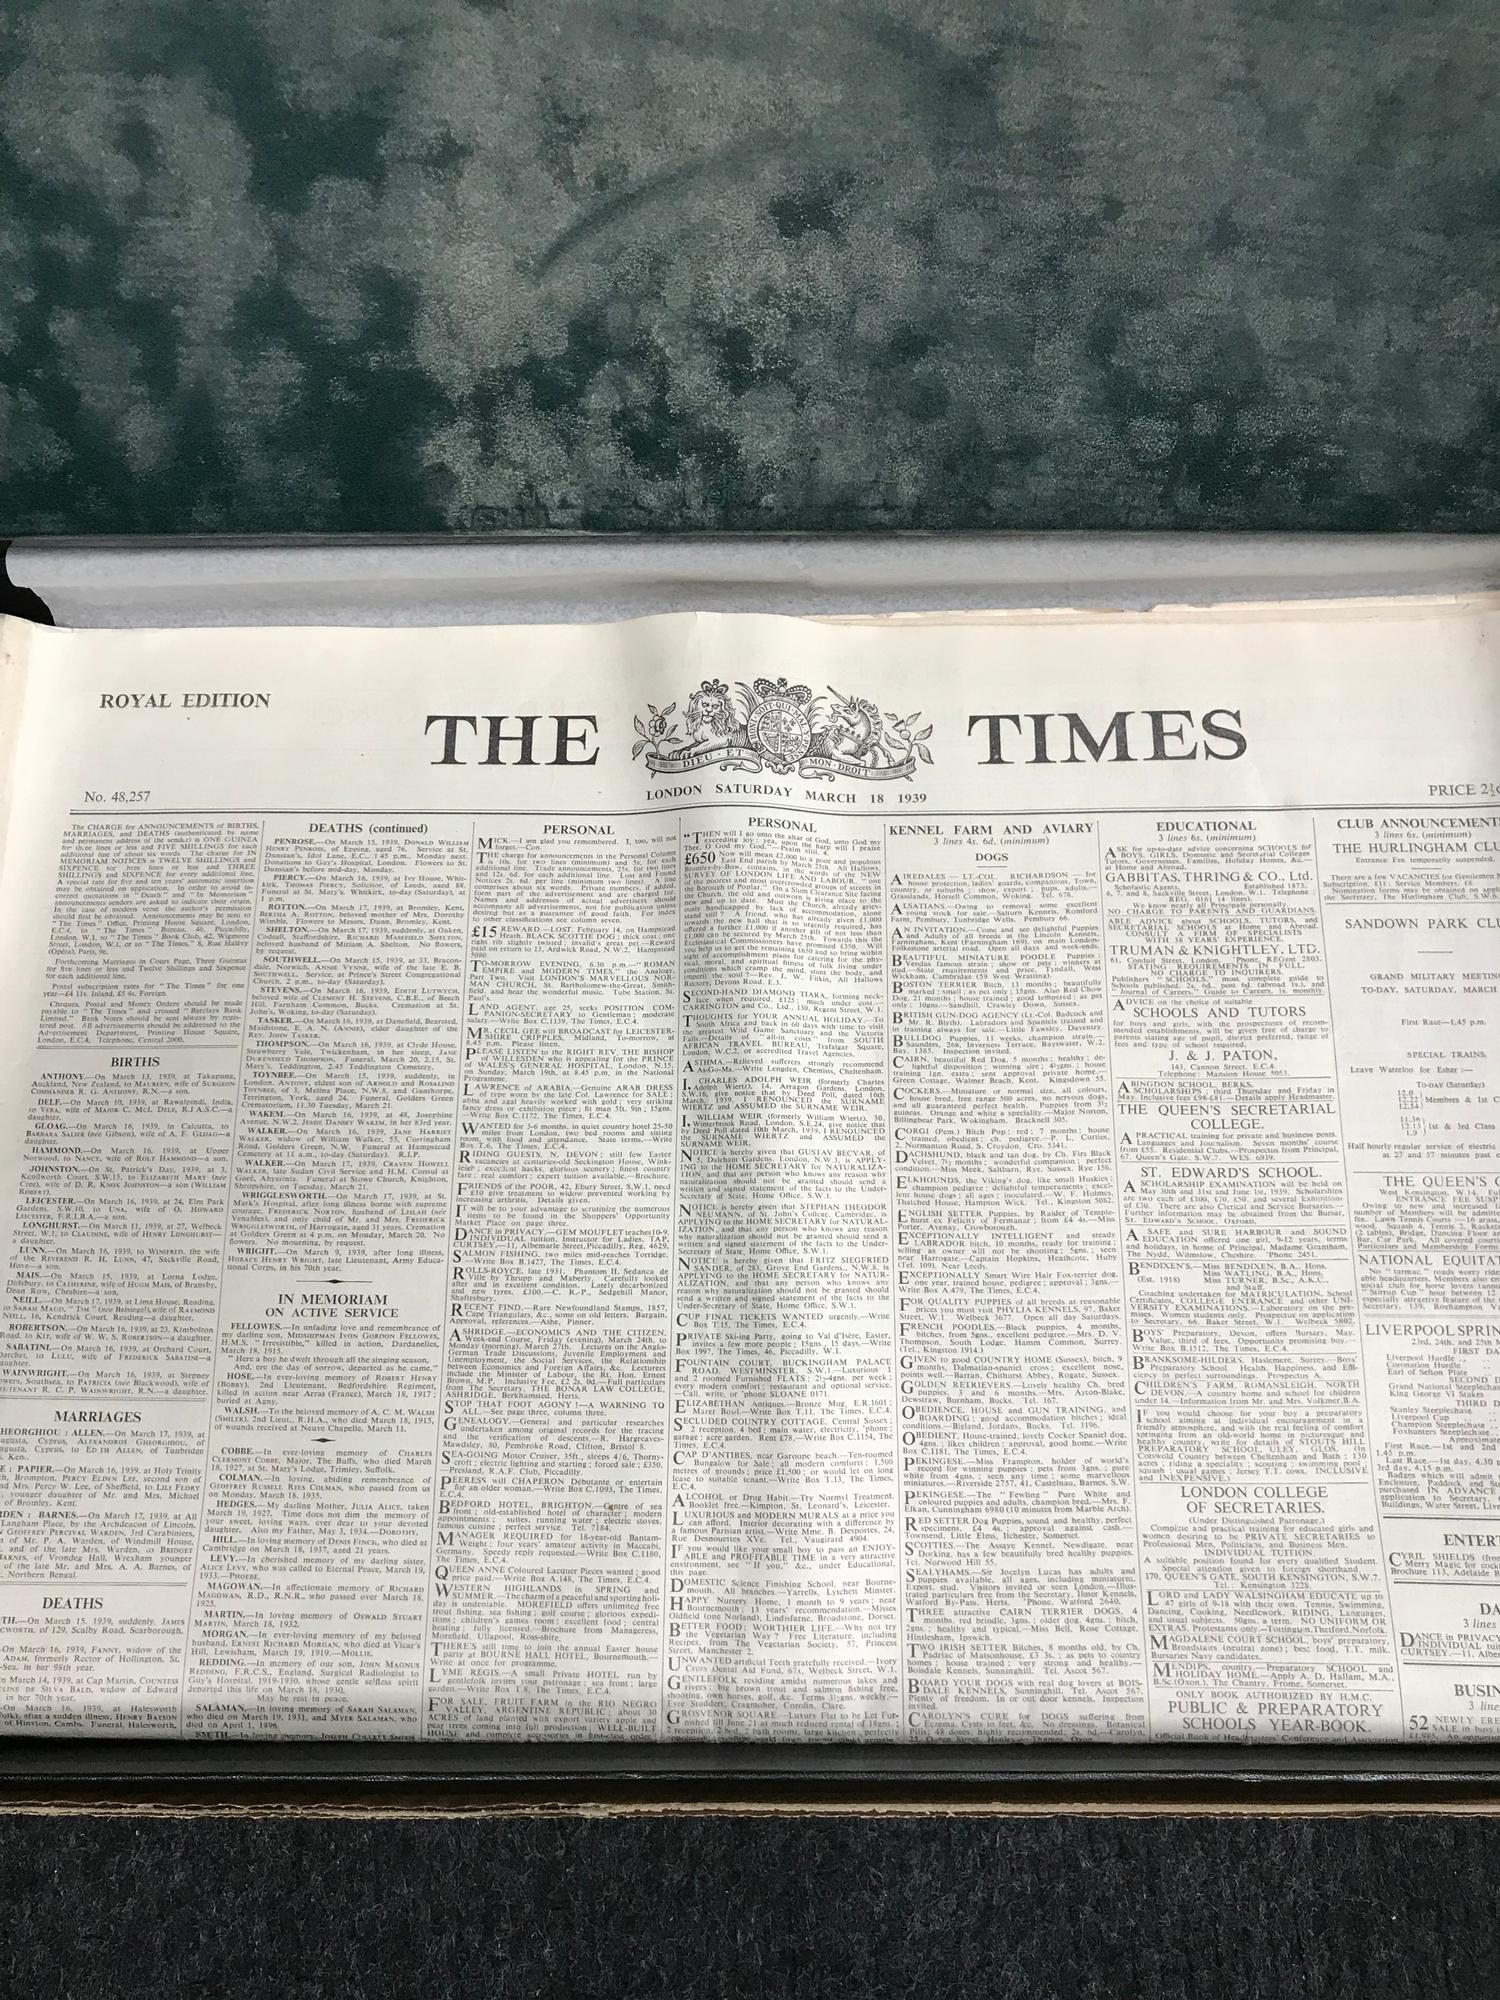 Original 1939 A Day to remember The Times newspaper with protective box. - Image 2 of 2